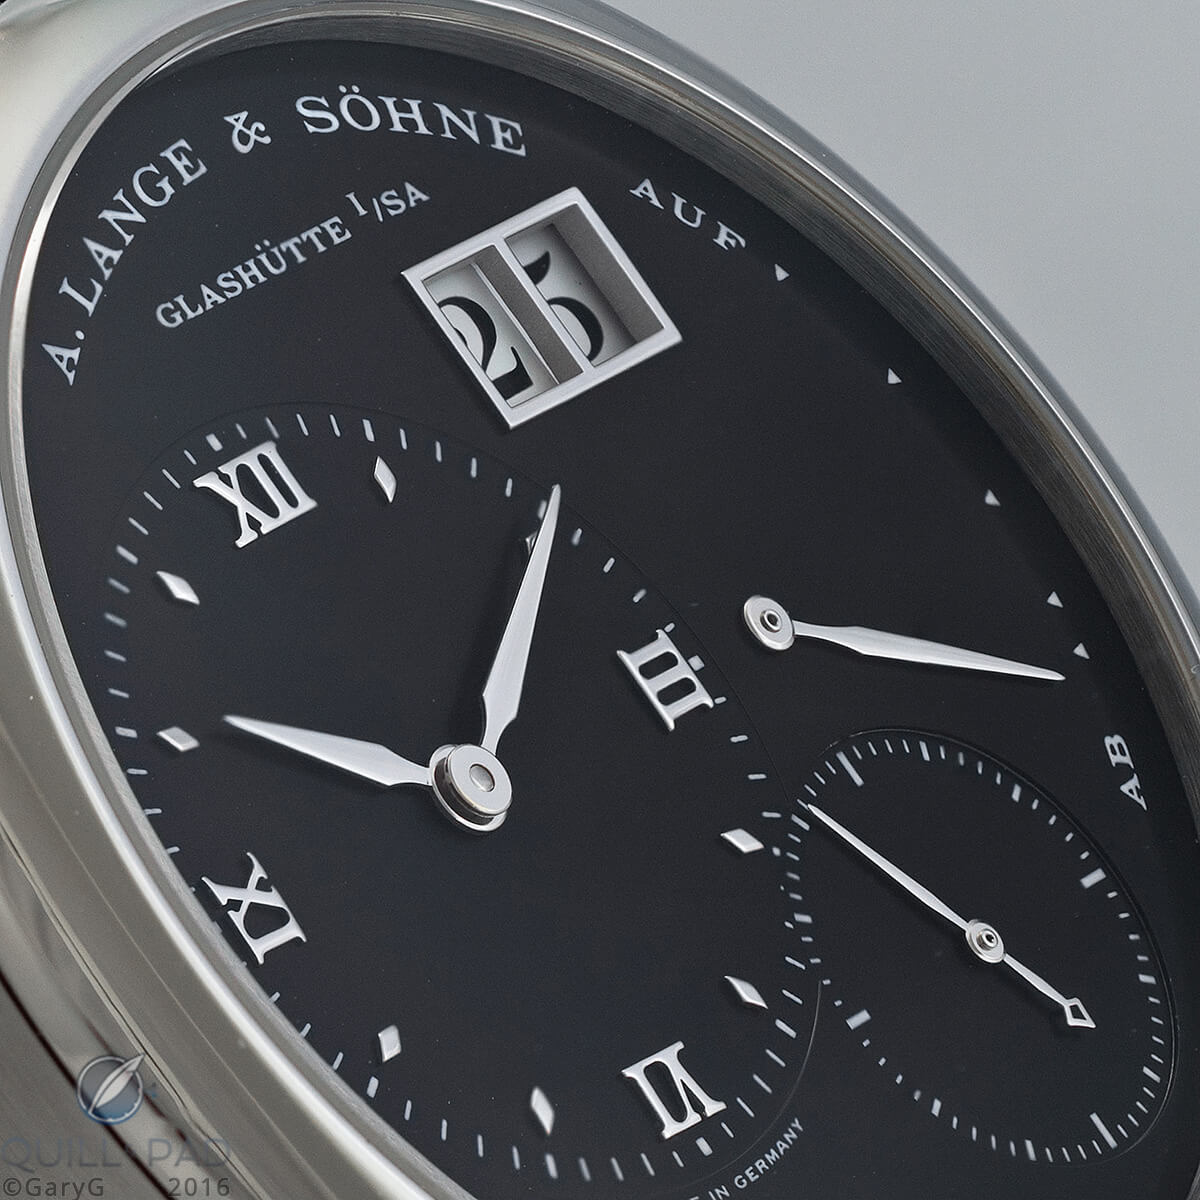 Dial detail of the A. Lange & Söhne Lange 1 in stainless steel